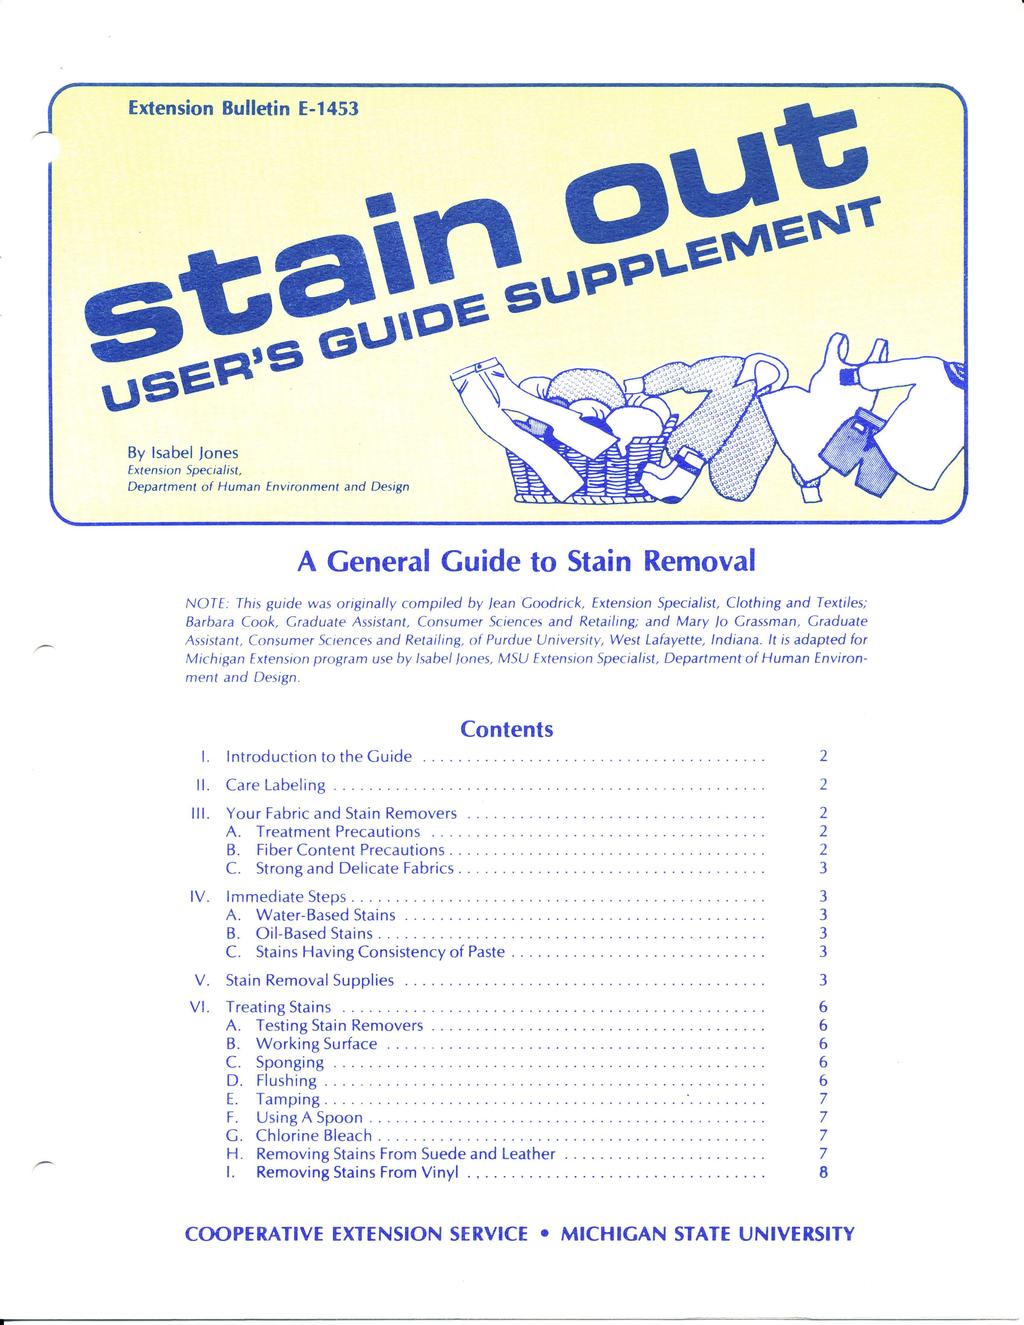 Extension Bulletin E-1453 \JS1S PtS GU\01S By Isabel Jones Extension Specialist, Department of Human Environment and Design A General Guide to Stain Removal N O TE: This guide was originally compiled